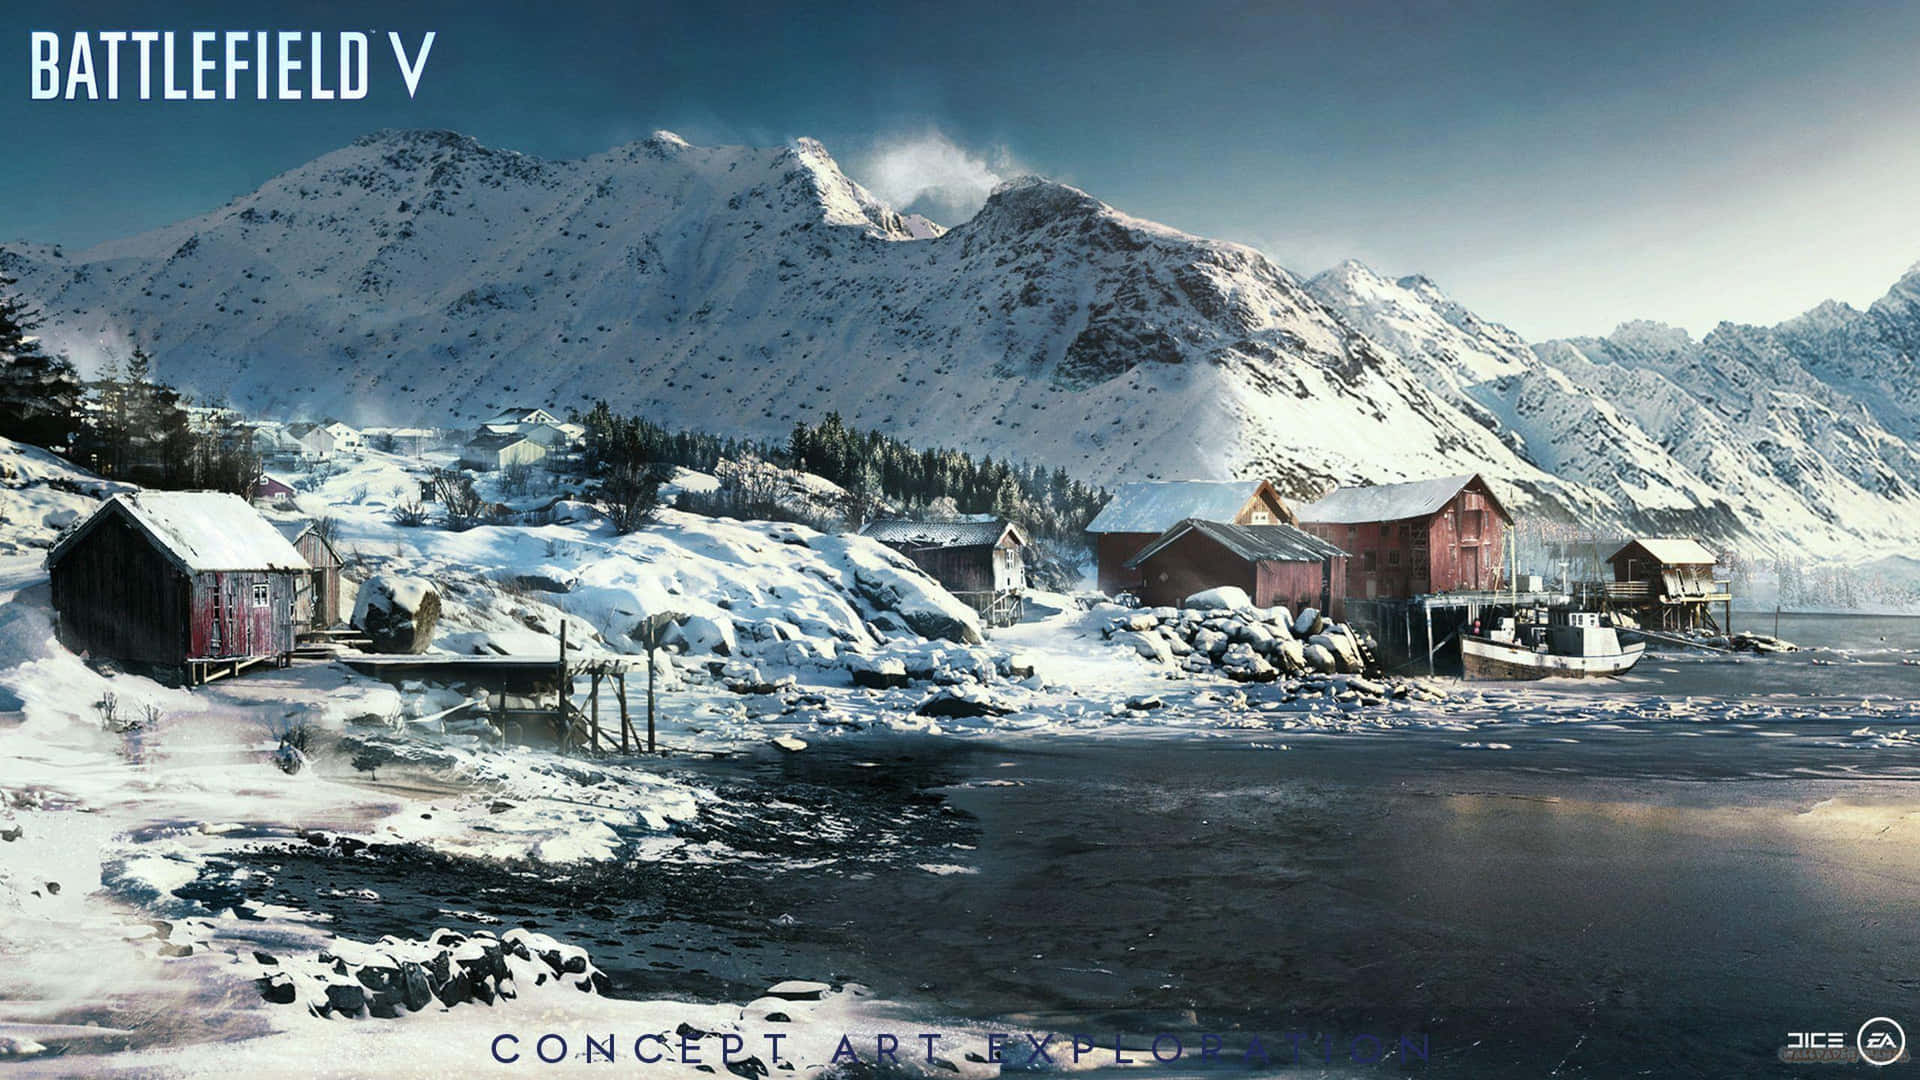 Battlefield V - A Snowy Scene With A Mountain And Houses